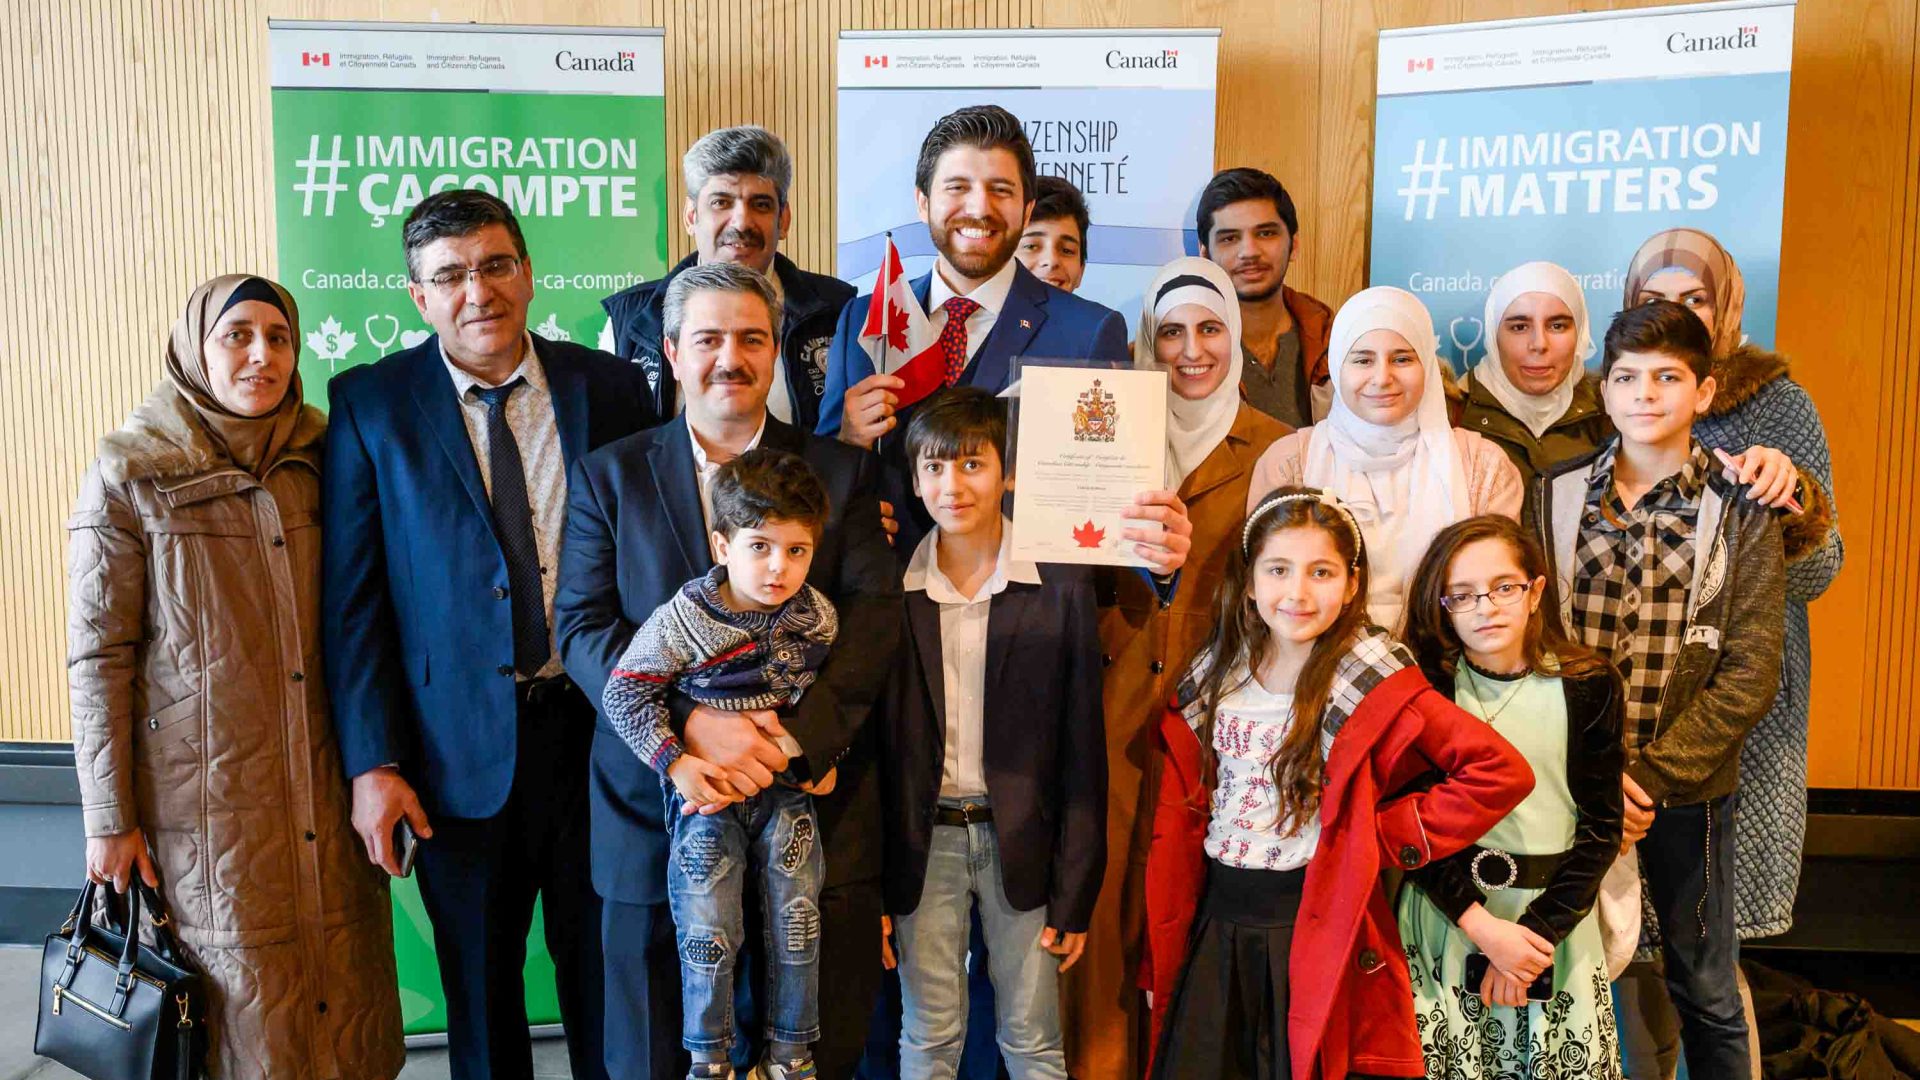 Tareq Hadhad, centre, poses with his family following his Canadian citizenship ceremony.